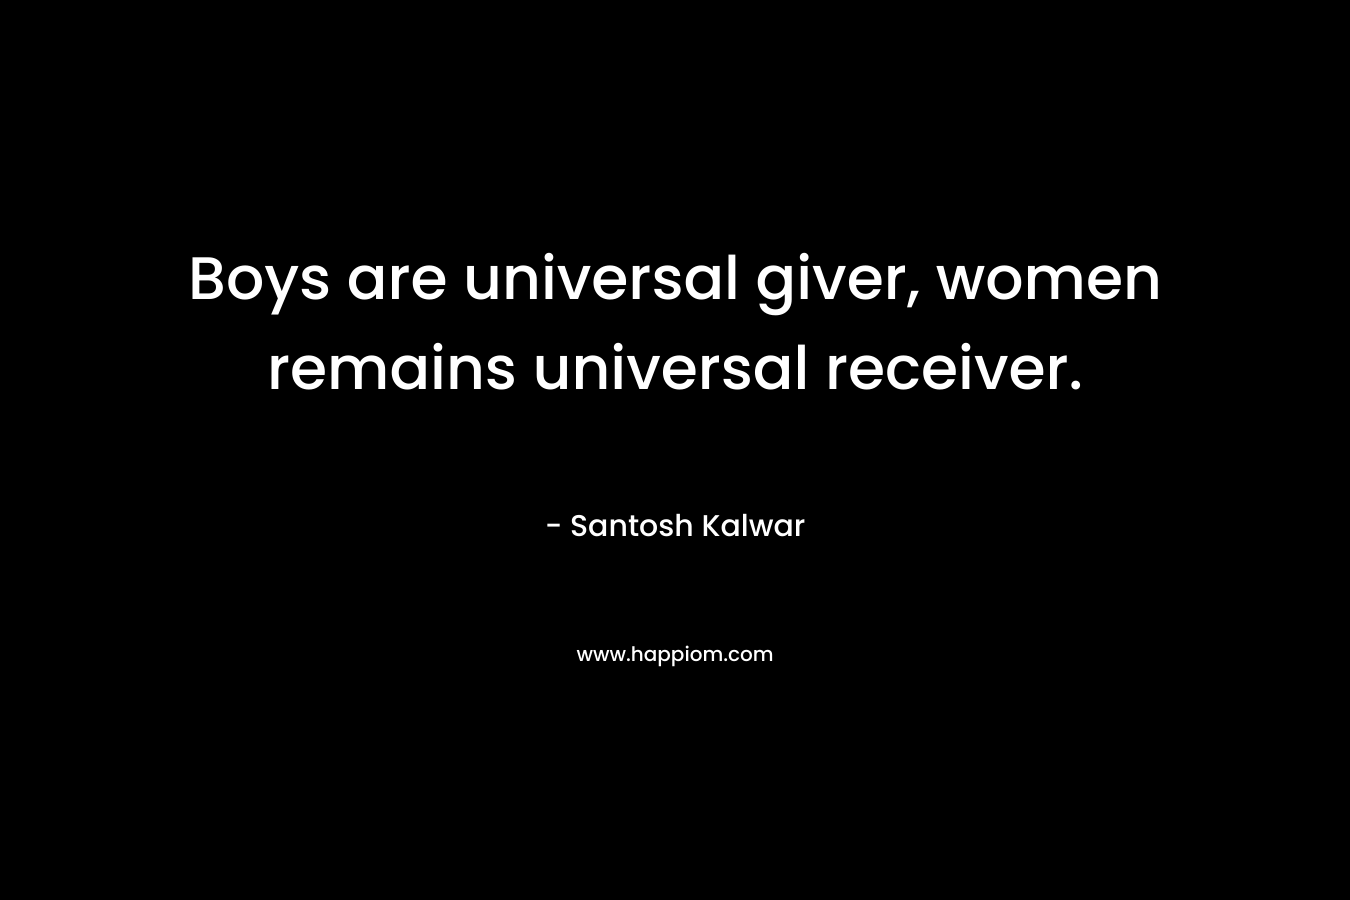 Boys are universal giver, women remains universal receiver.